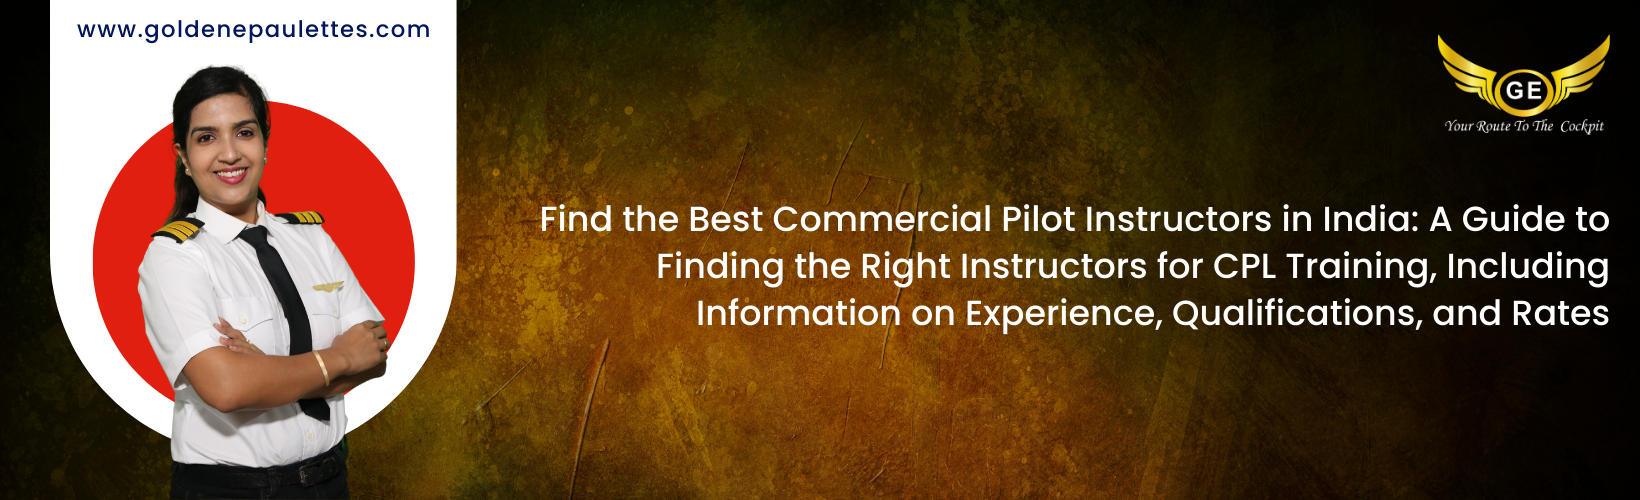 Finding the Right Commercial Pilot Instructors in India